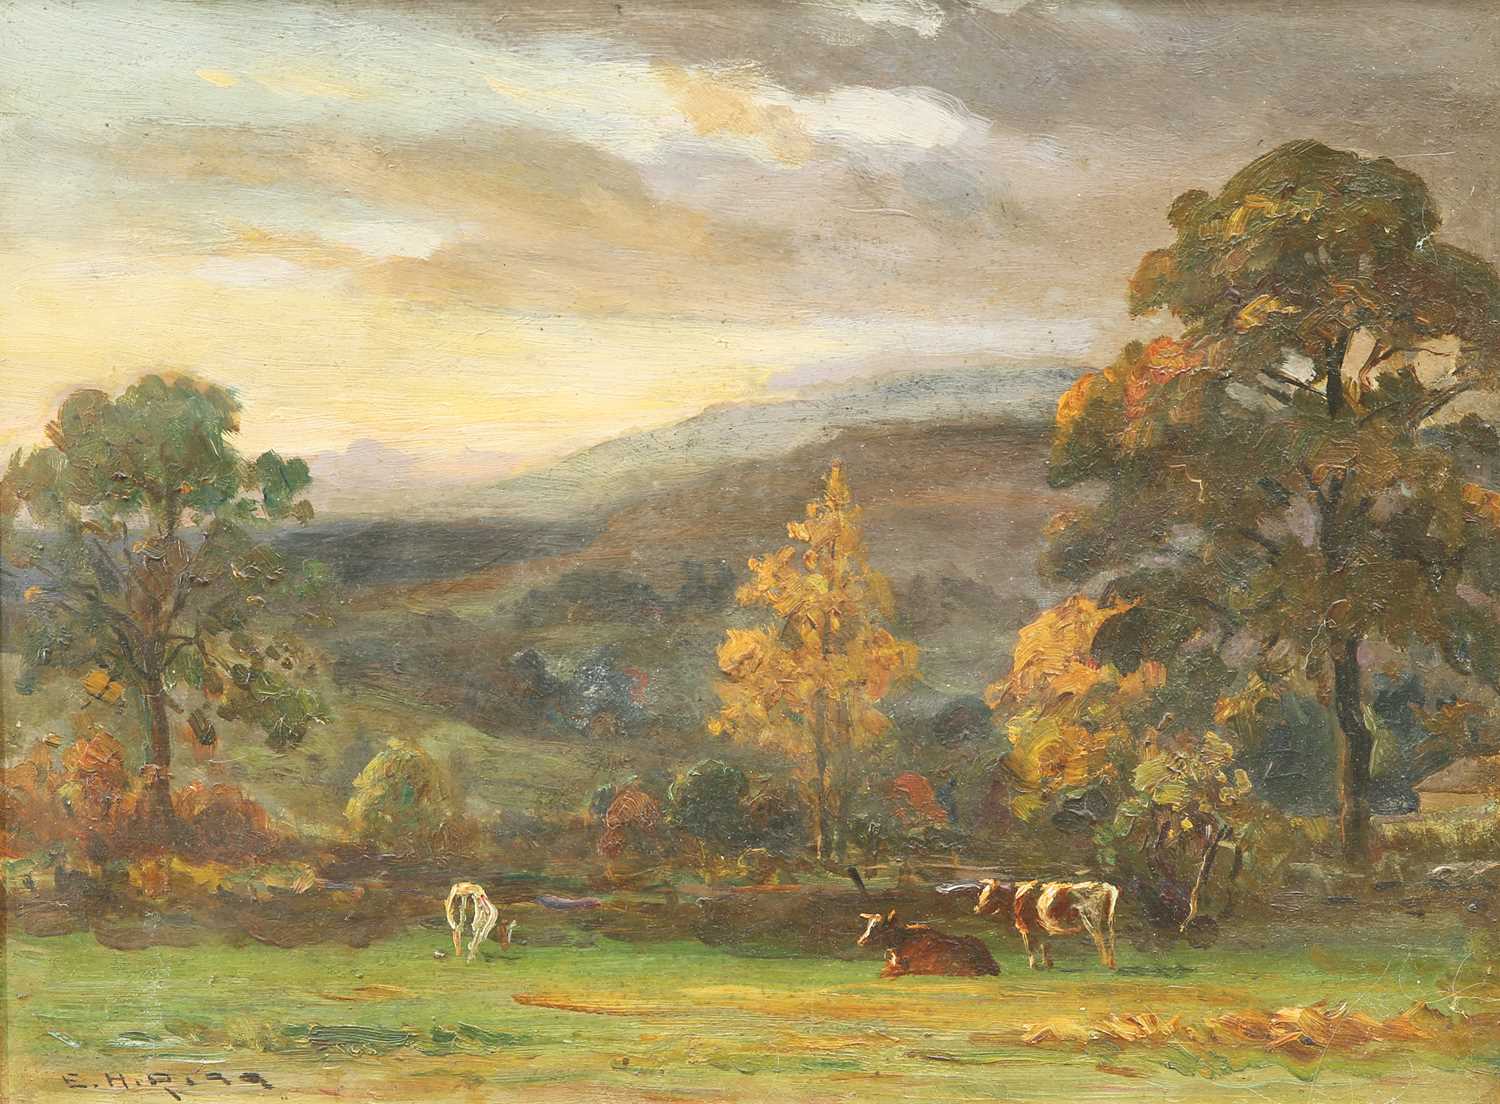 ERNEST HIGGINS RIGG (STAITHES GROUP 1868-1947) CATTLE IN A FIELD